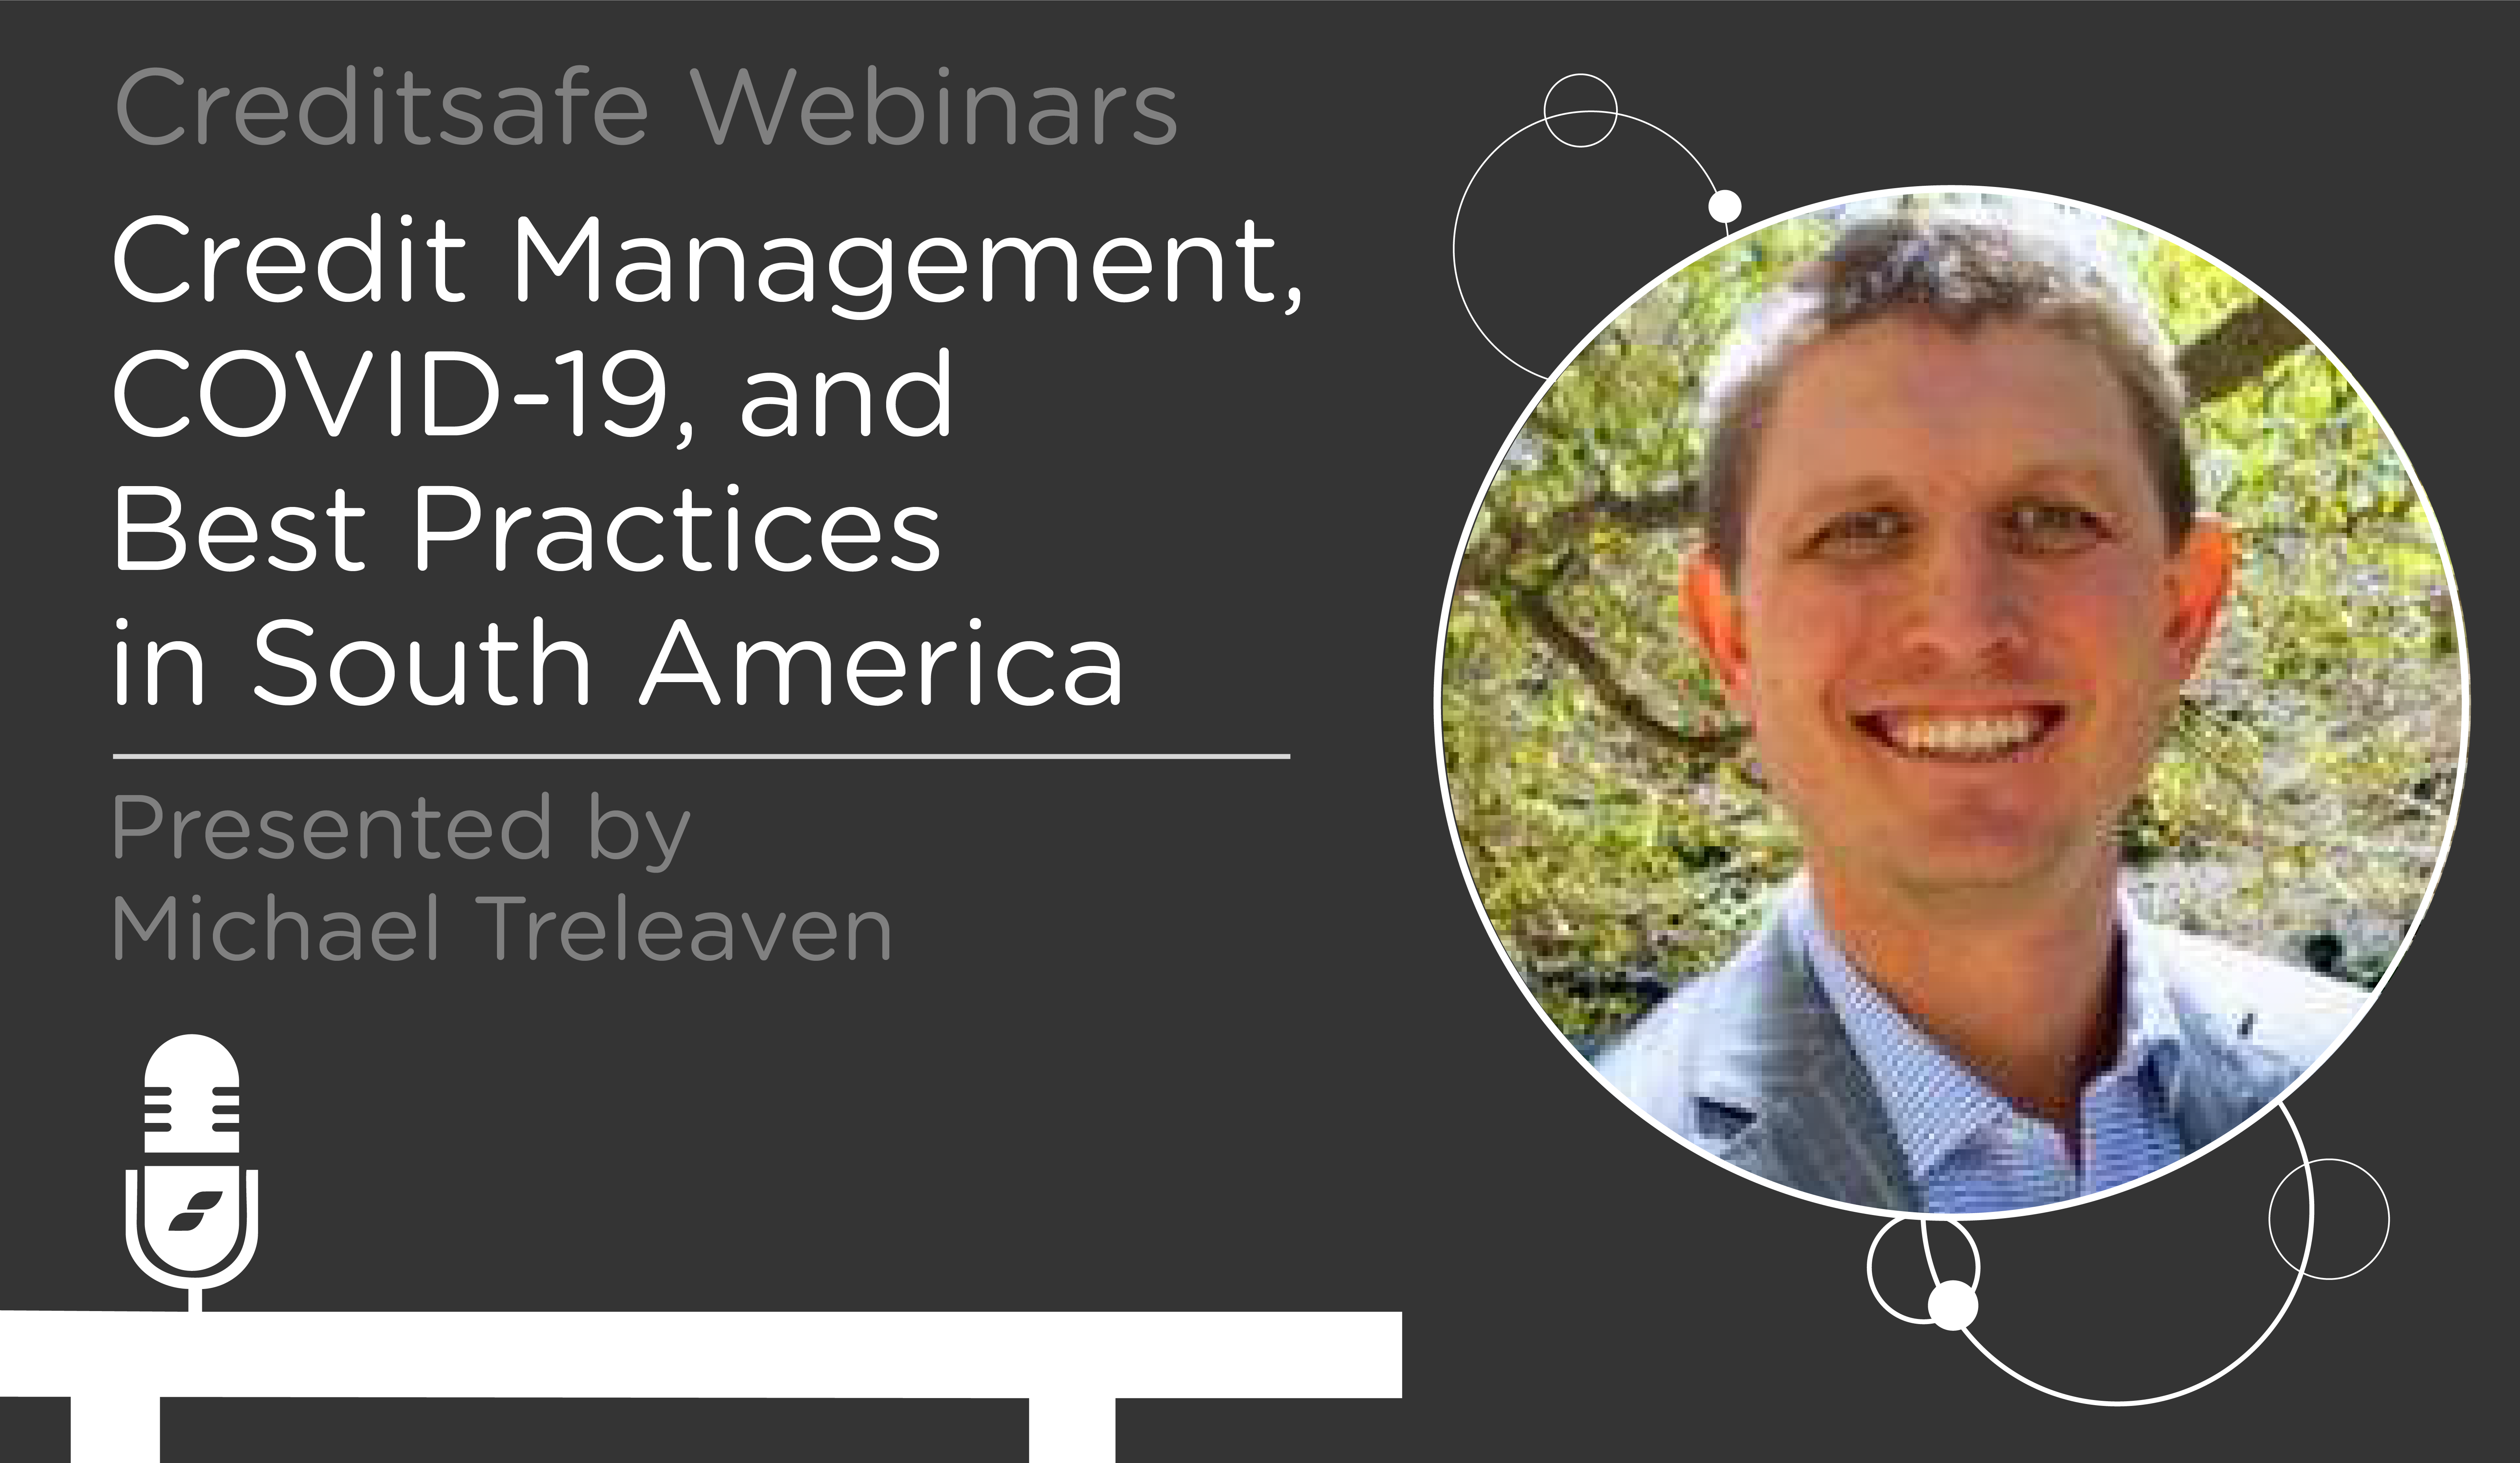 webinargraphic-best-practices-south-america